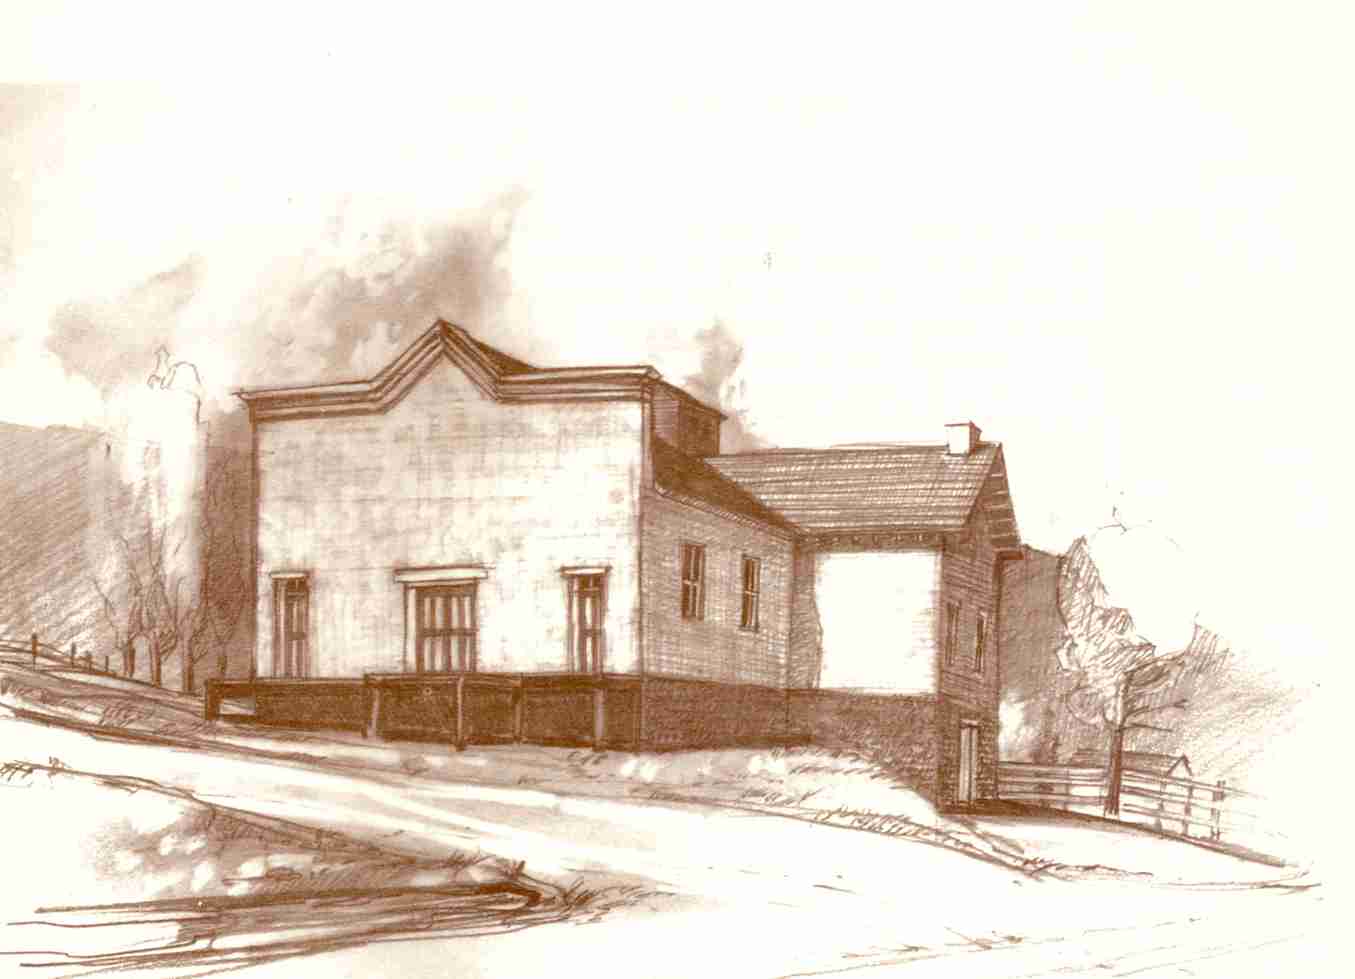 Sketch of the St. George Social Hall or Opera House